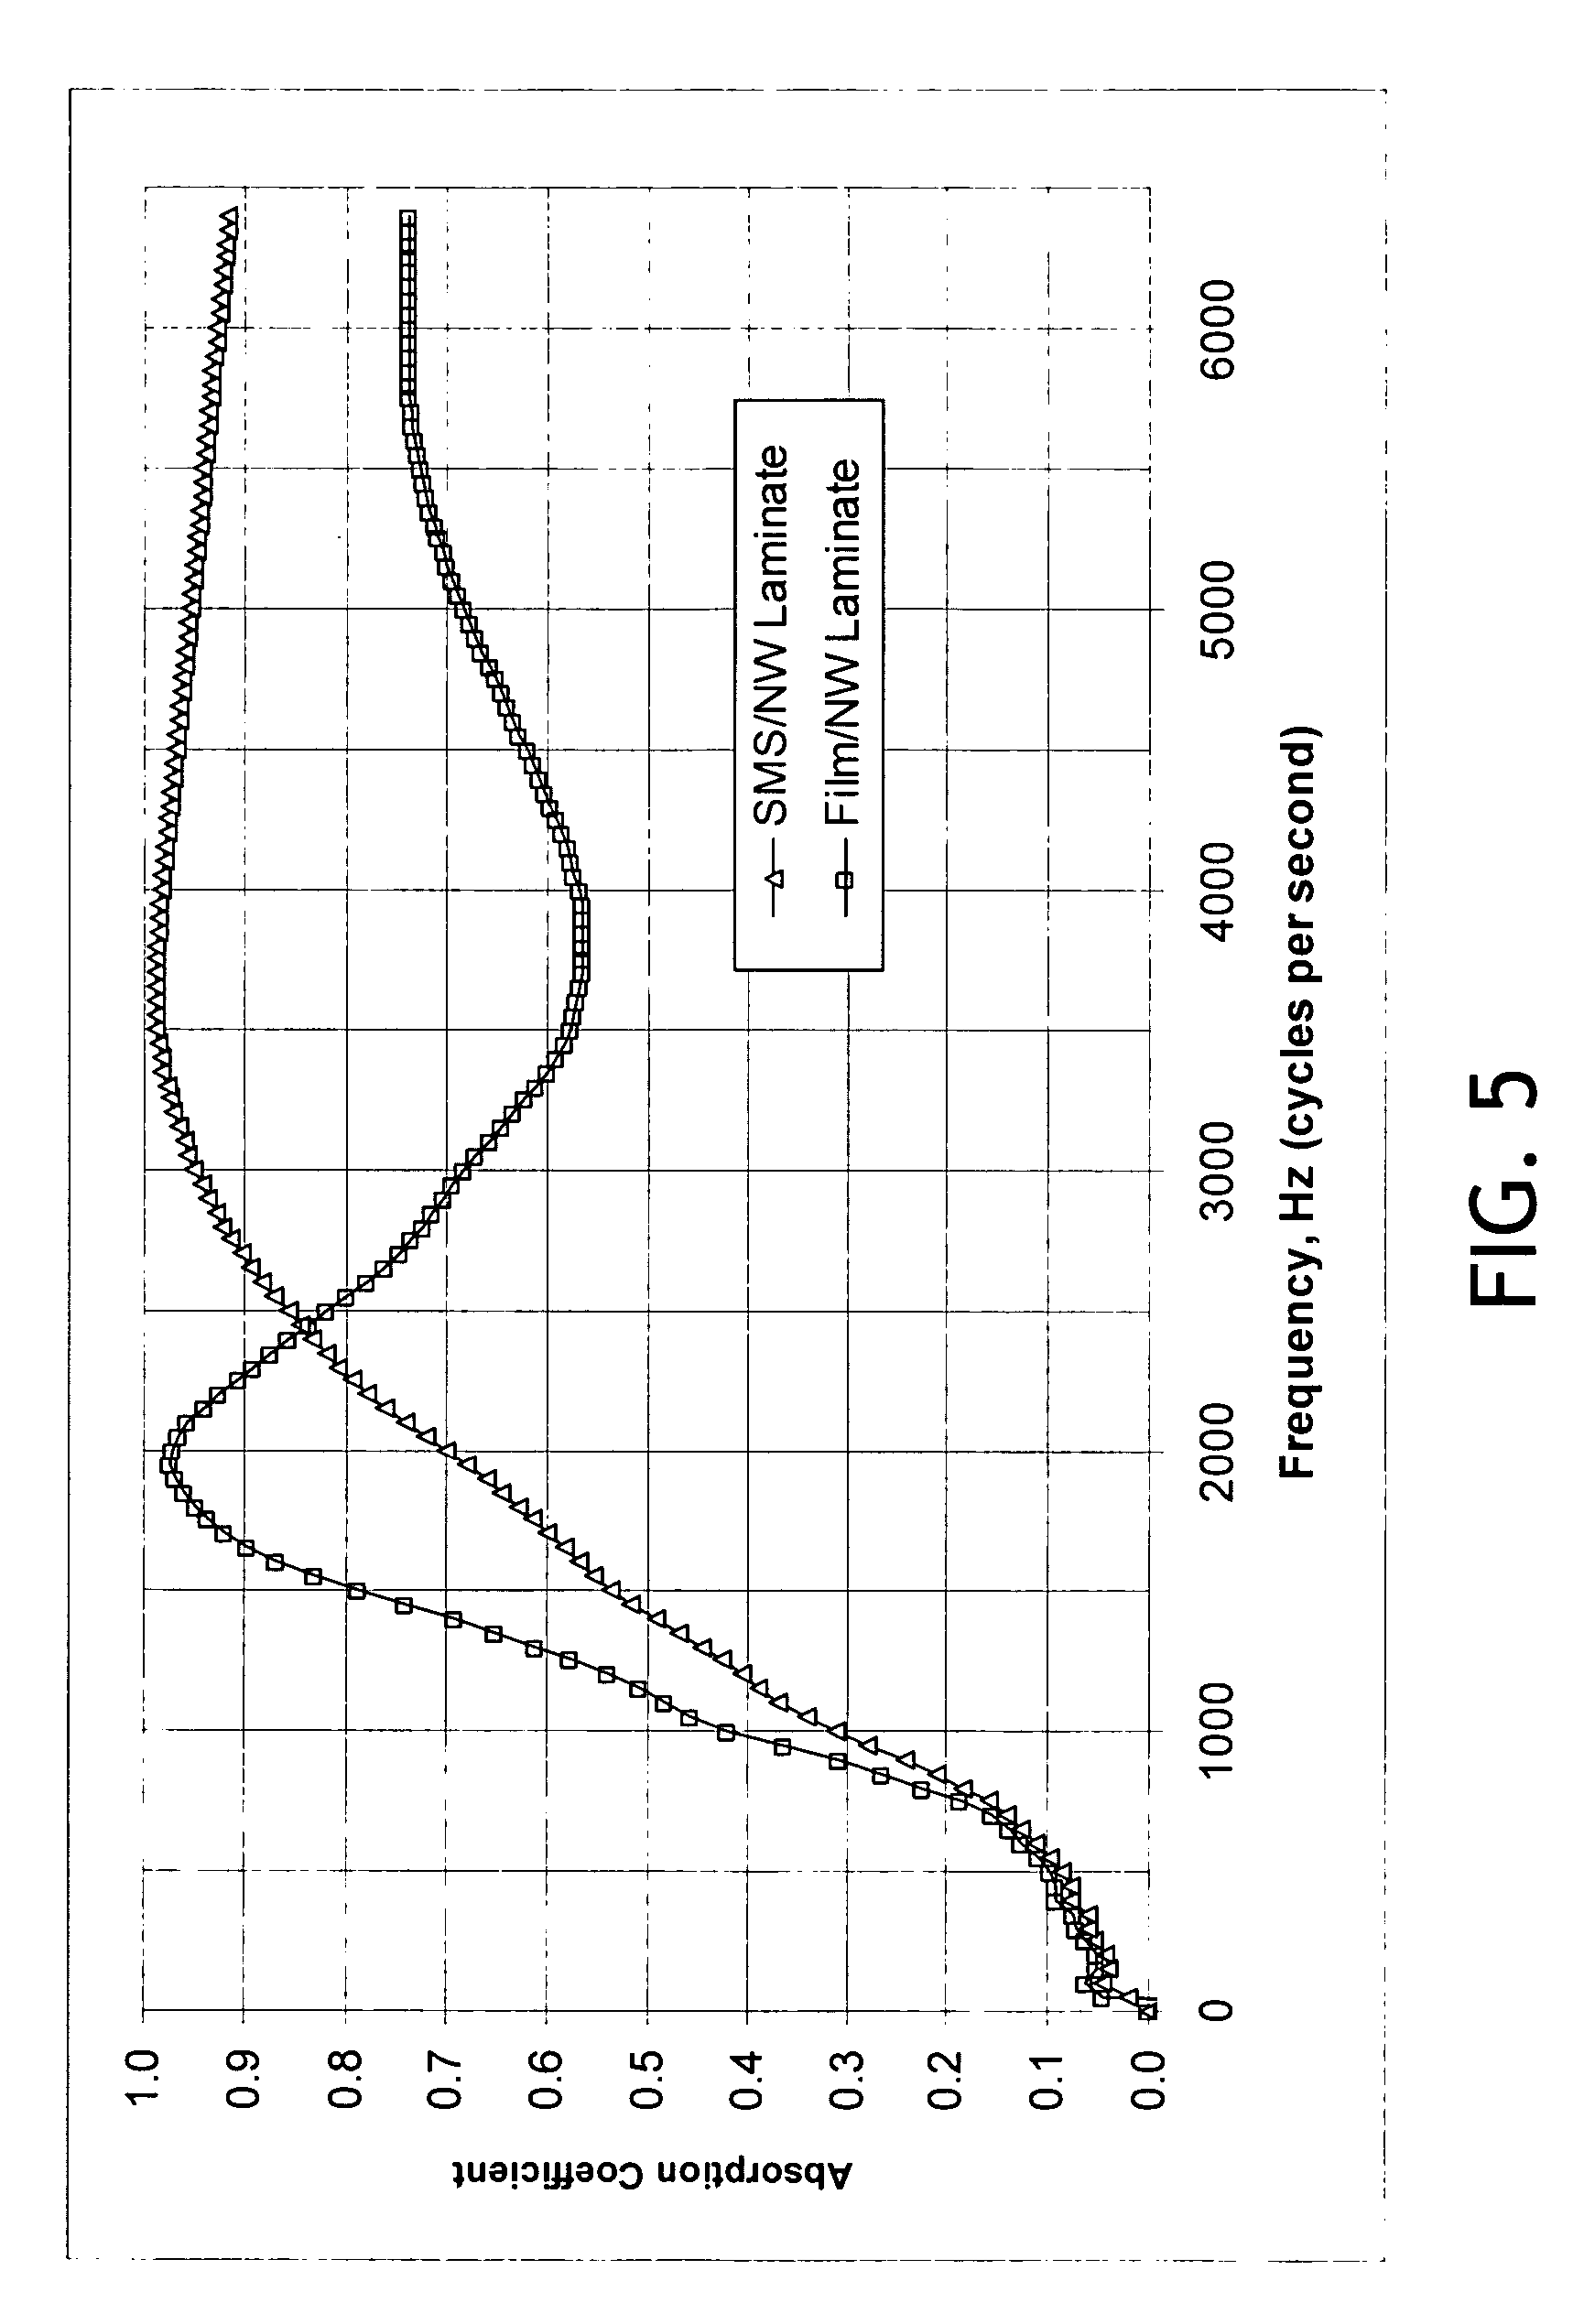 Acoustic material with liquid repellency